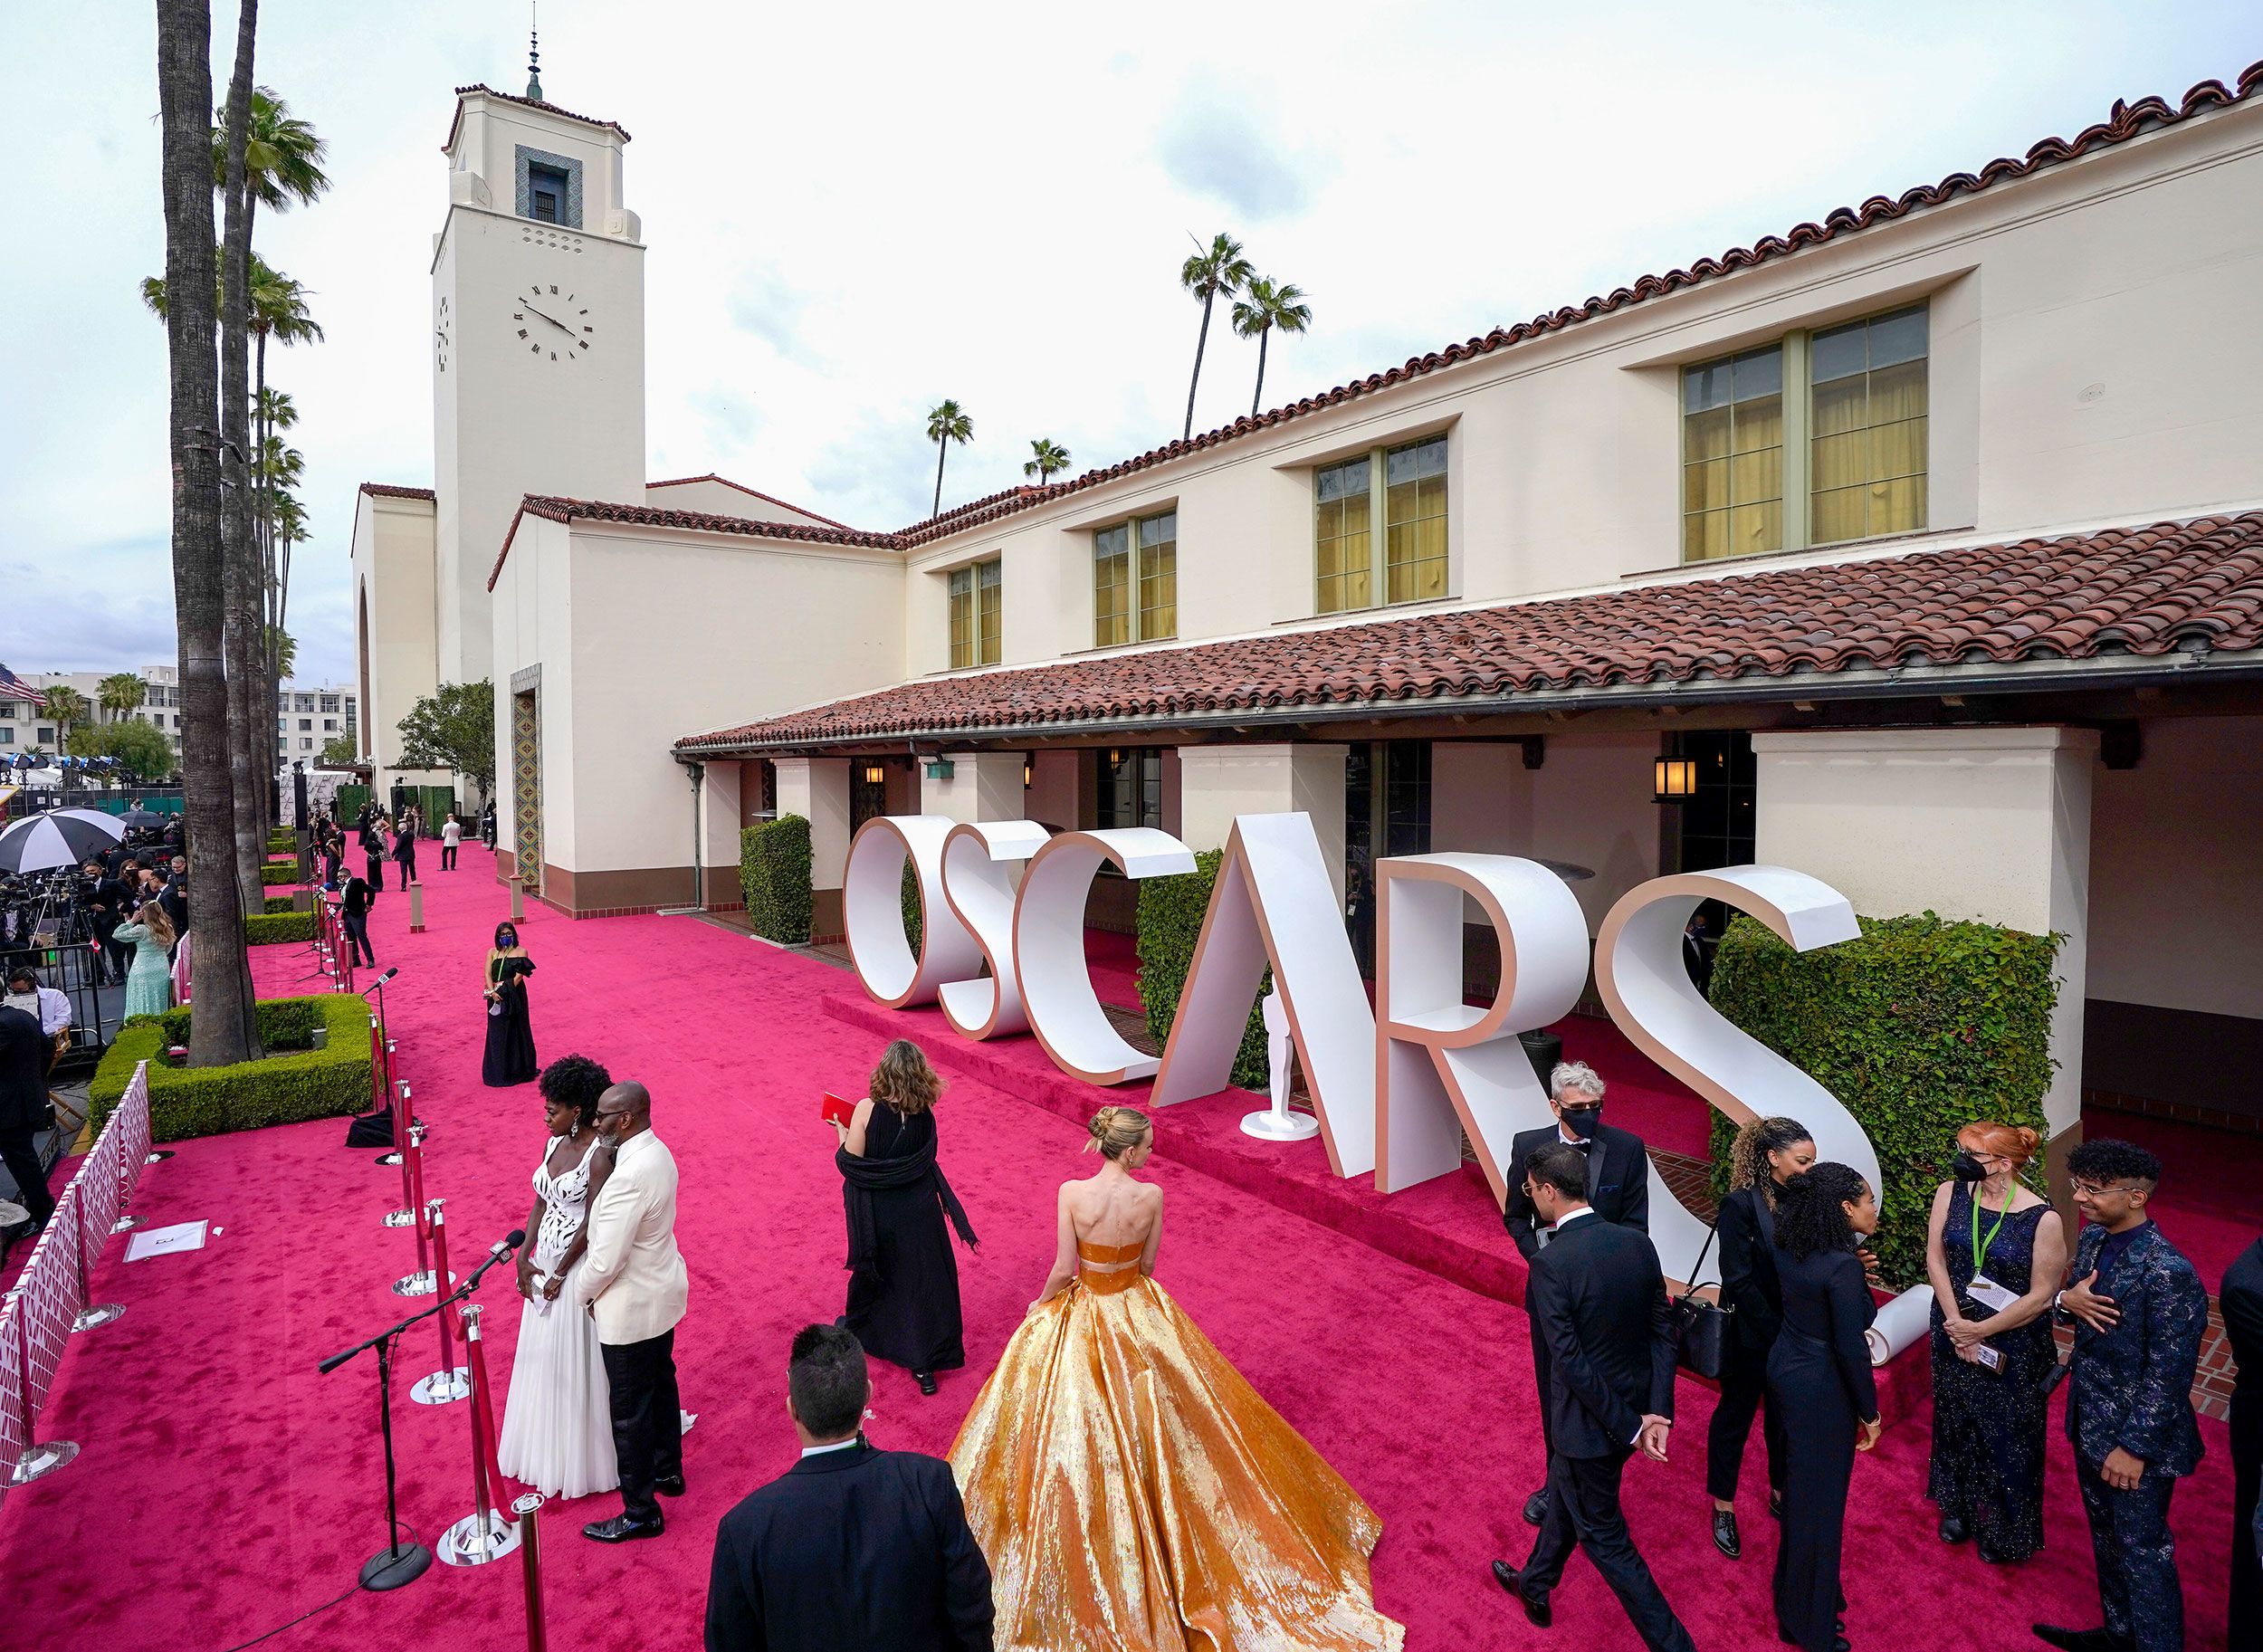 Oscars 2021: 'Nomadland' Wins Best Picture as Hollywood Looks to Turn a  Corner - WSJ